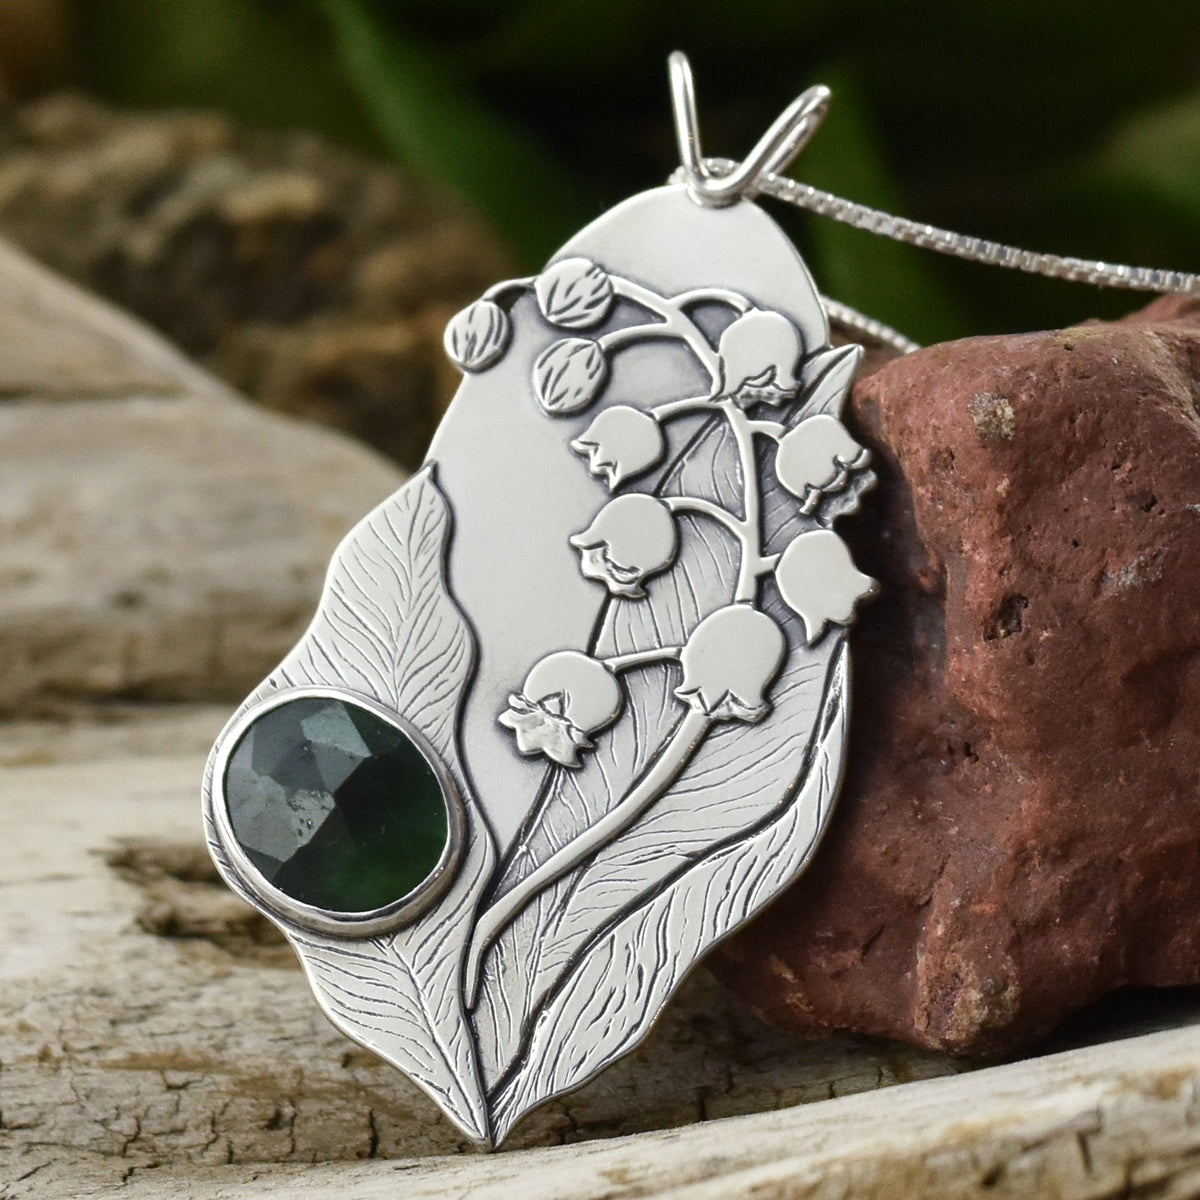 Emerald Lily of the Valley Wonderland Pendant - Silver Pendant   6897 - handmade by Beth Millner Jewelry